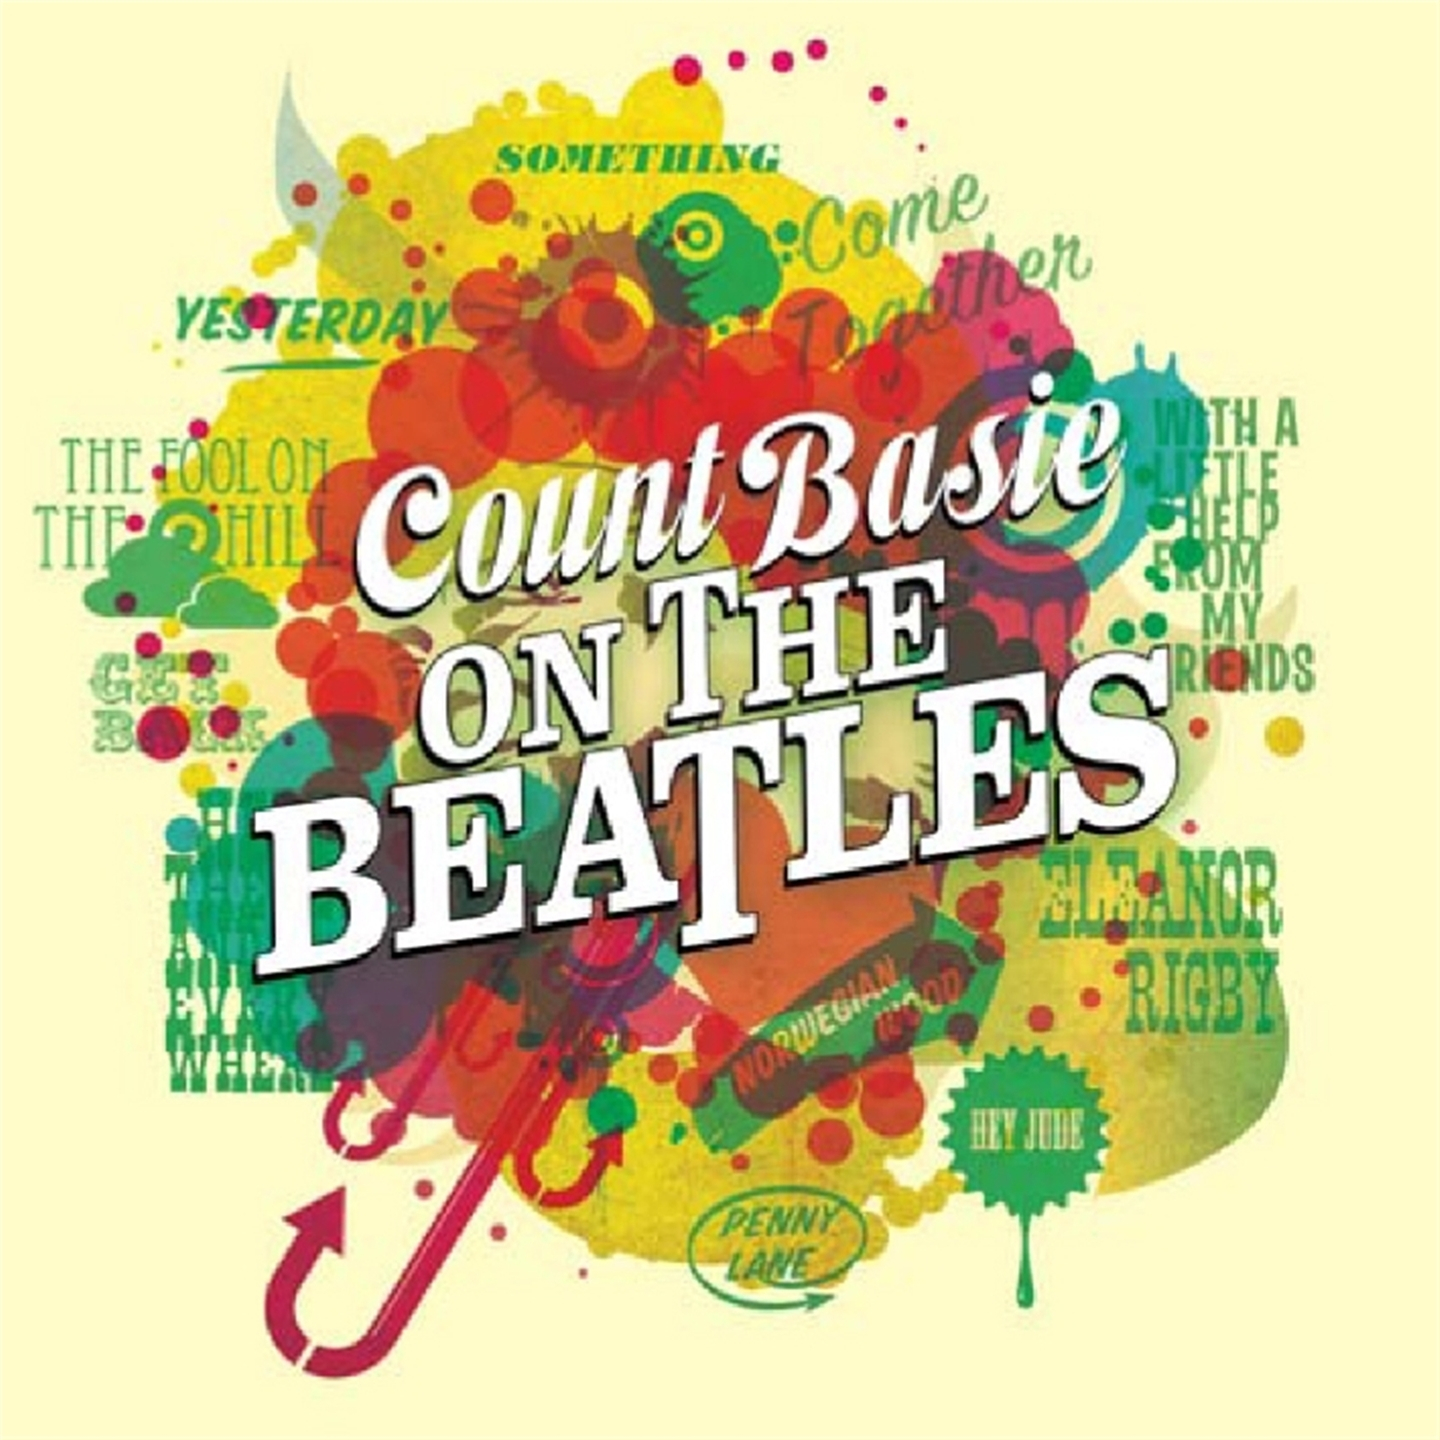 ON THE BEATLES (+ THE ATOMIC MR. BASIE)